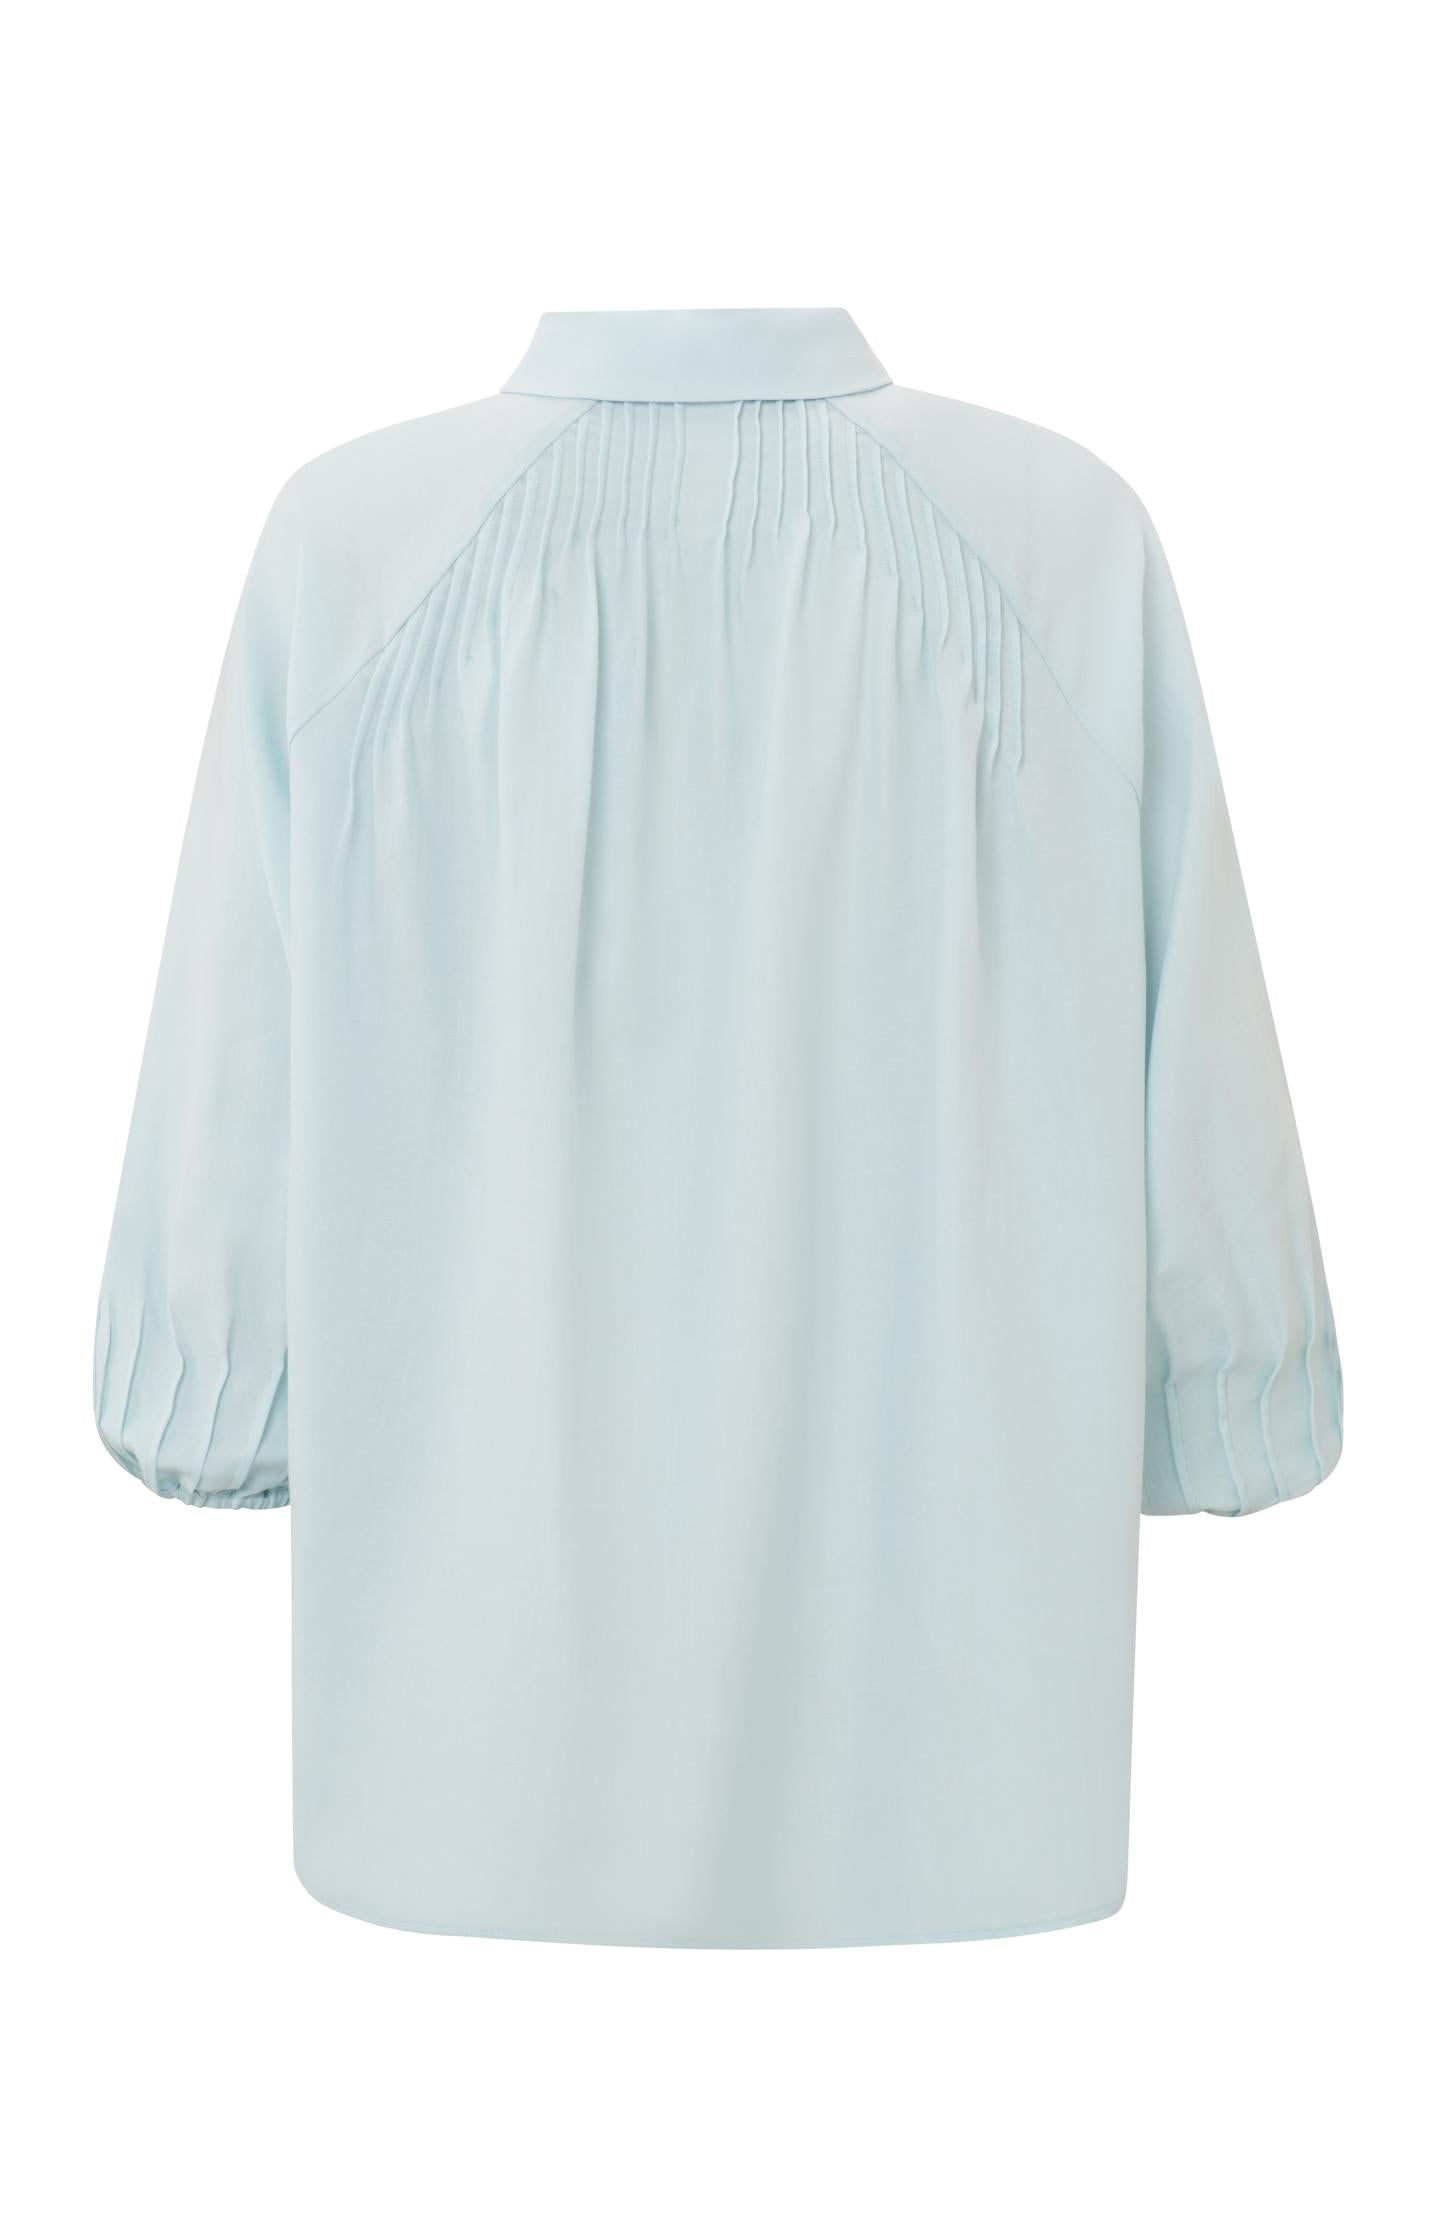 Woven top with collar, 7/8 raglan sleeves and pleated detail